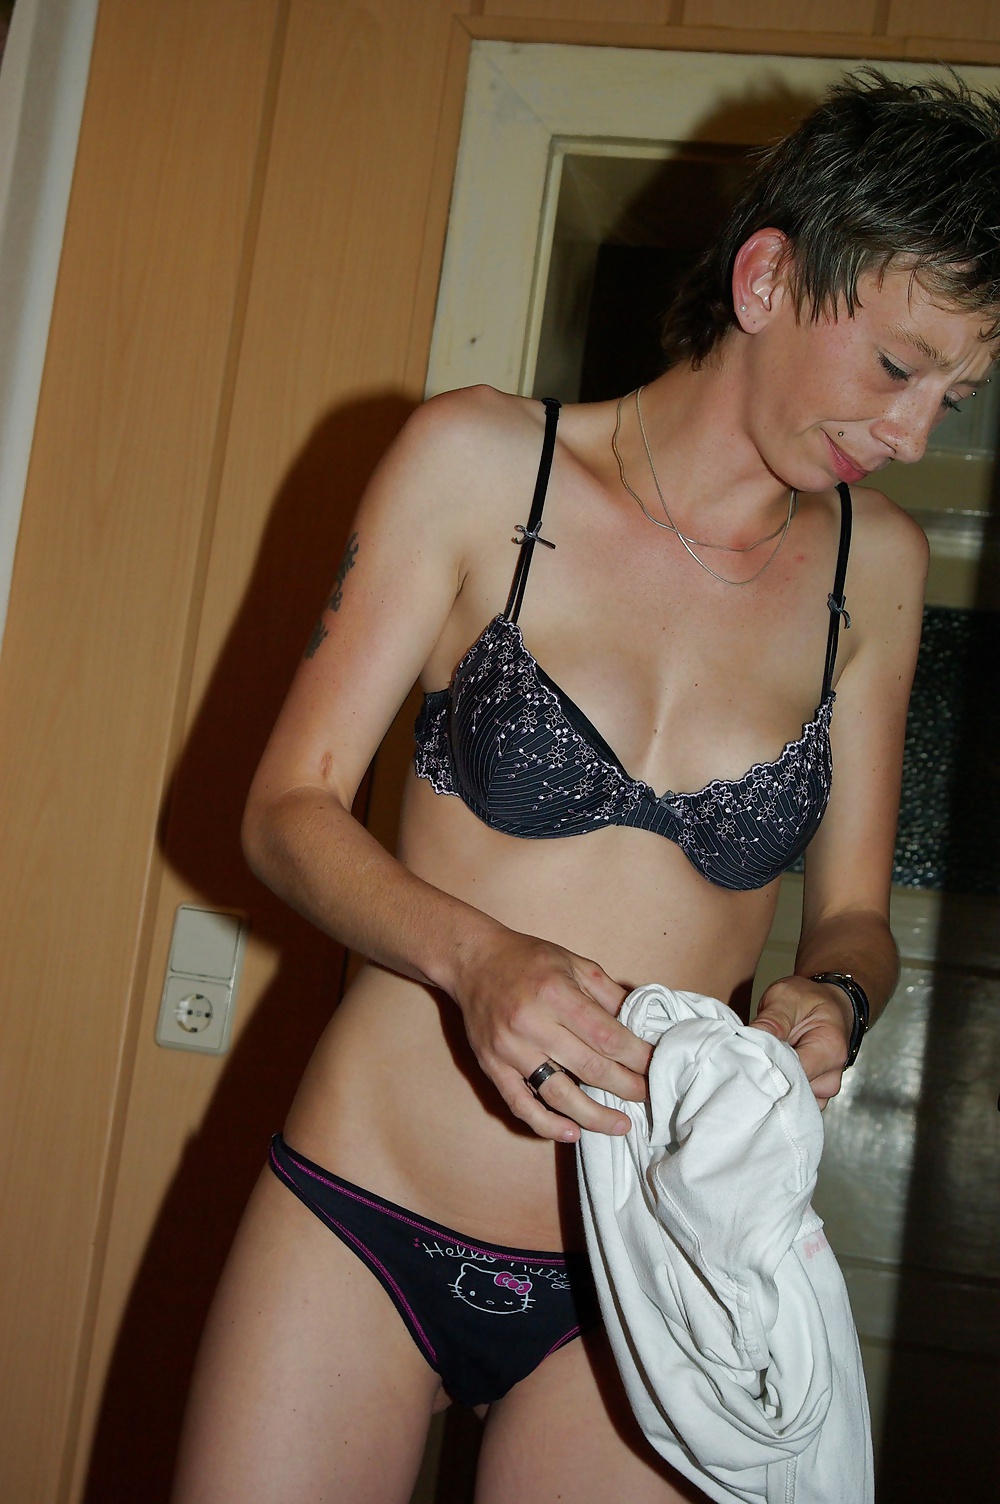 wet and horny german milf  private pics adult photos